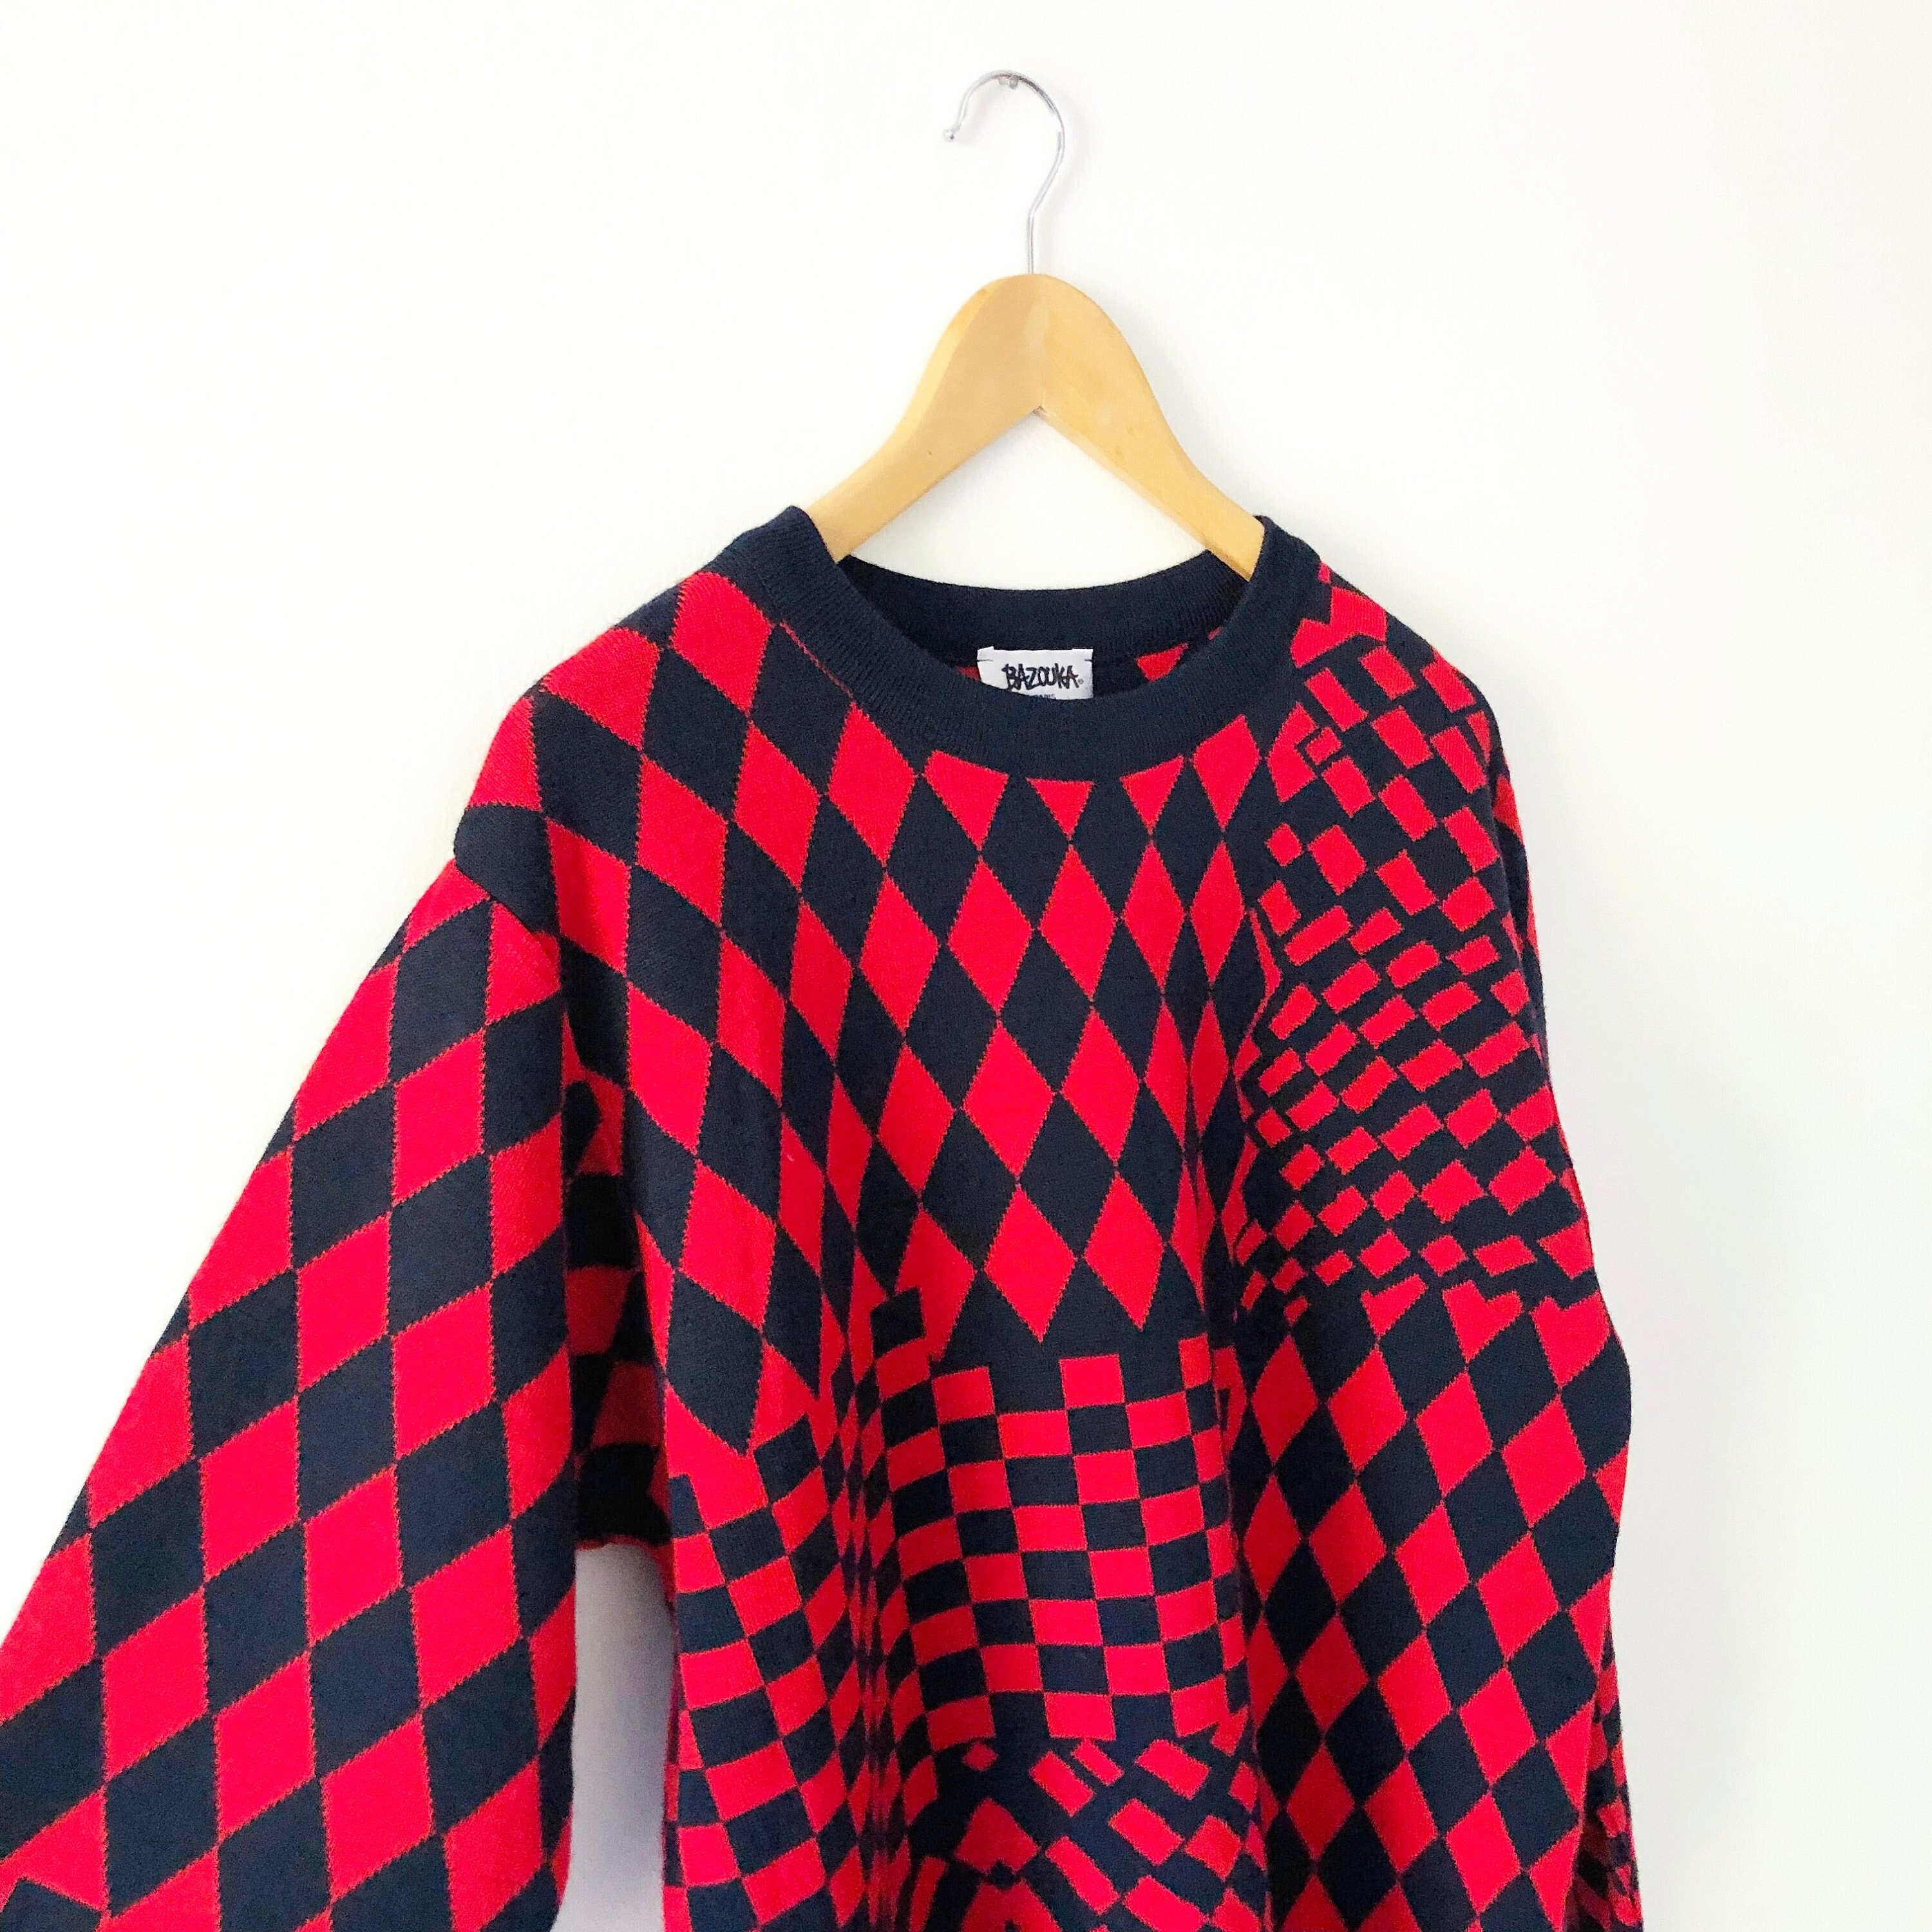 Vintage 90S Long Wool Blend Red & Blue Checkered Geometric Print Knit Sweater, Made in France, Size L